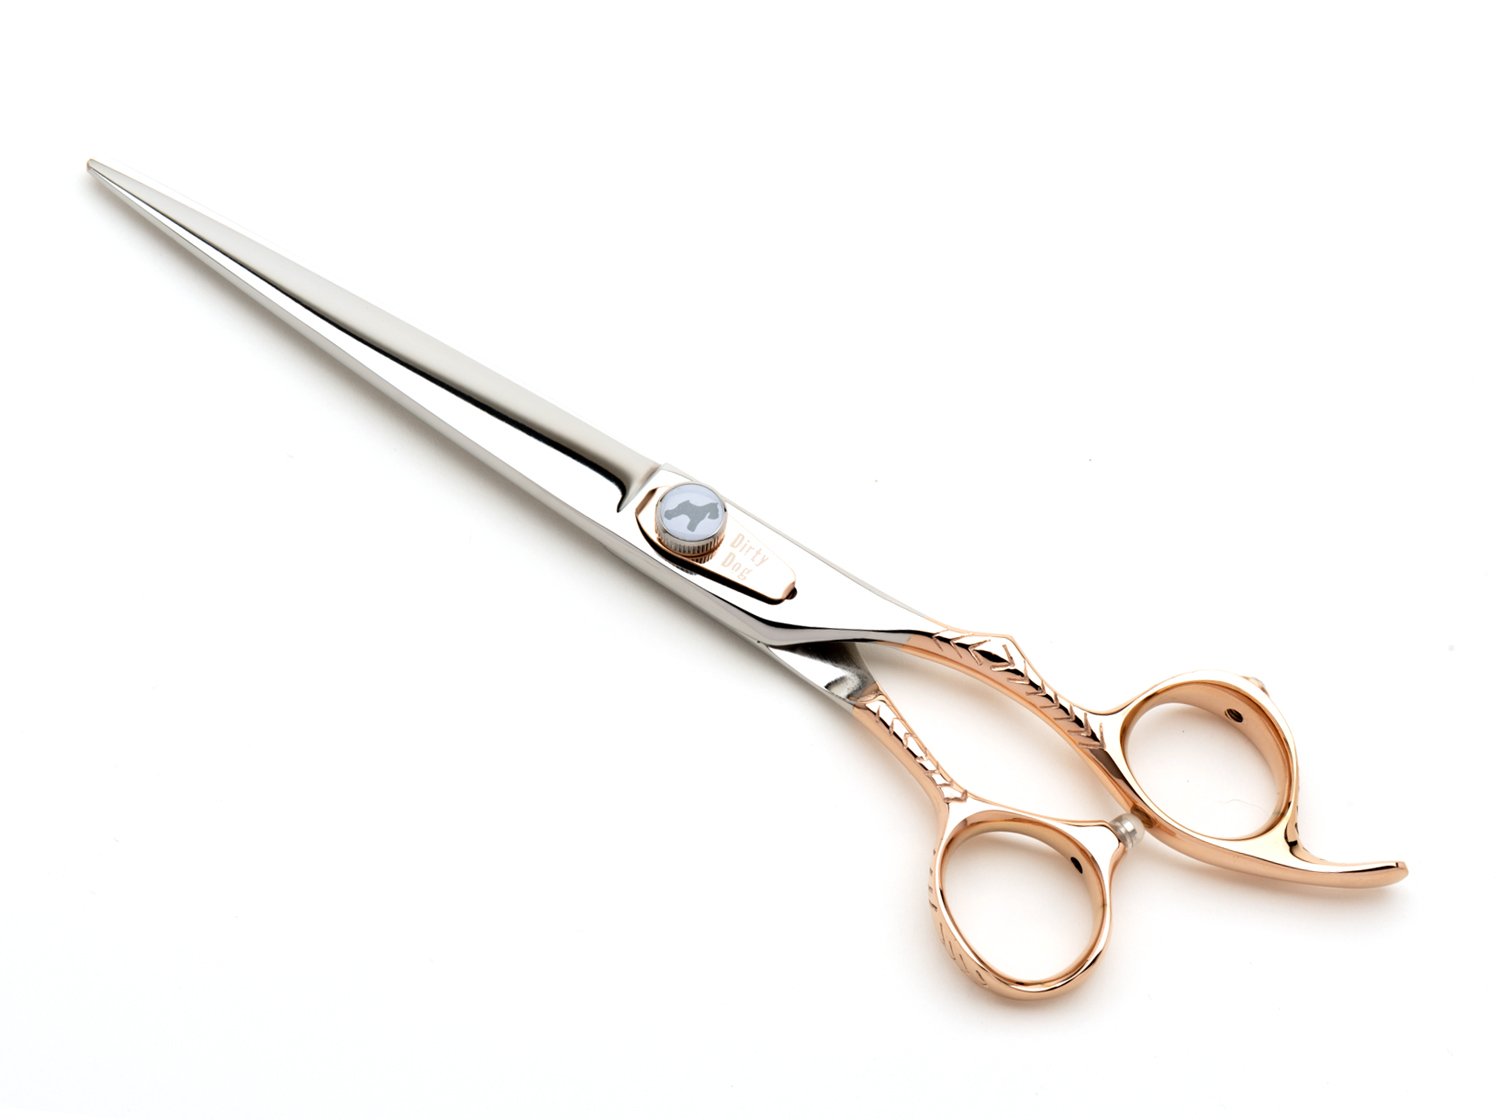 The 13 Best Hair Cutting Scissors to Shop in 2023